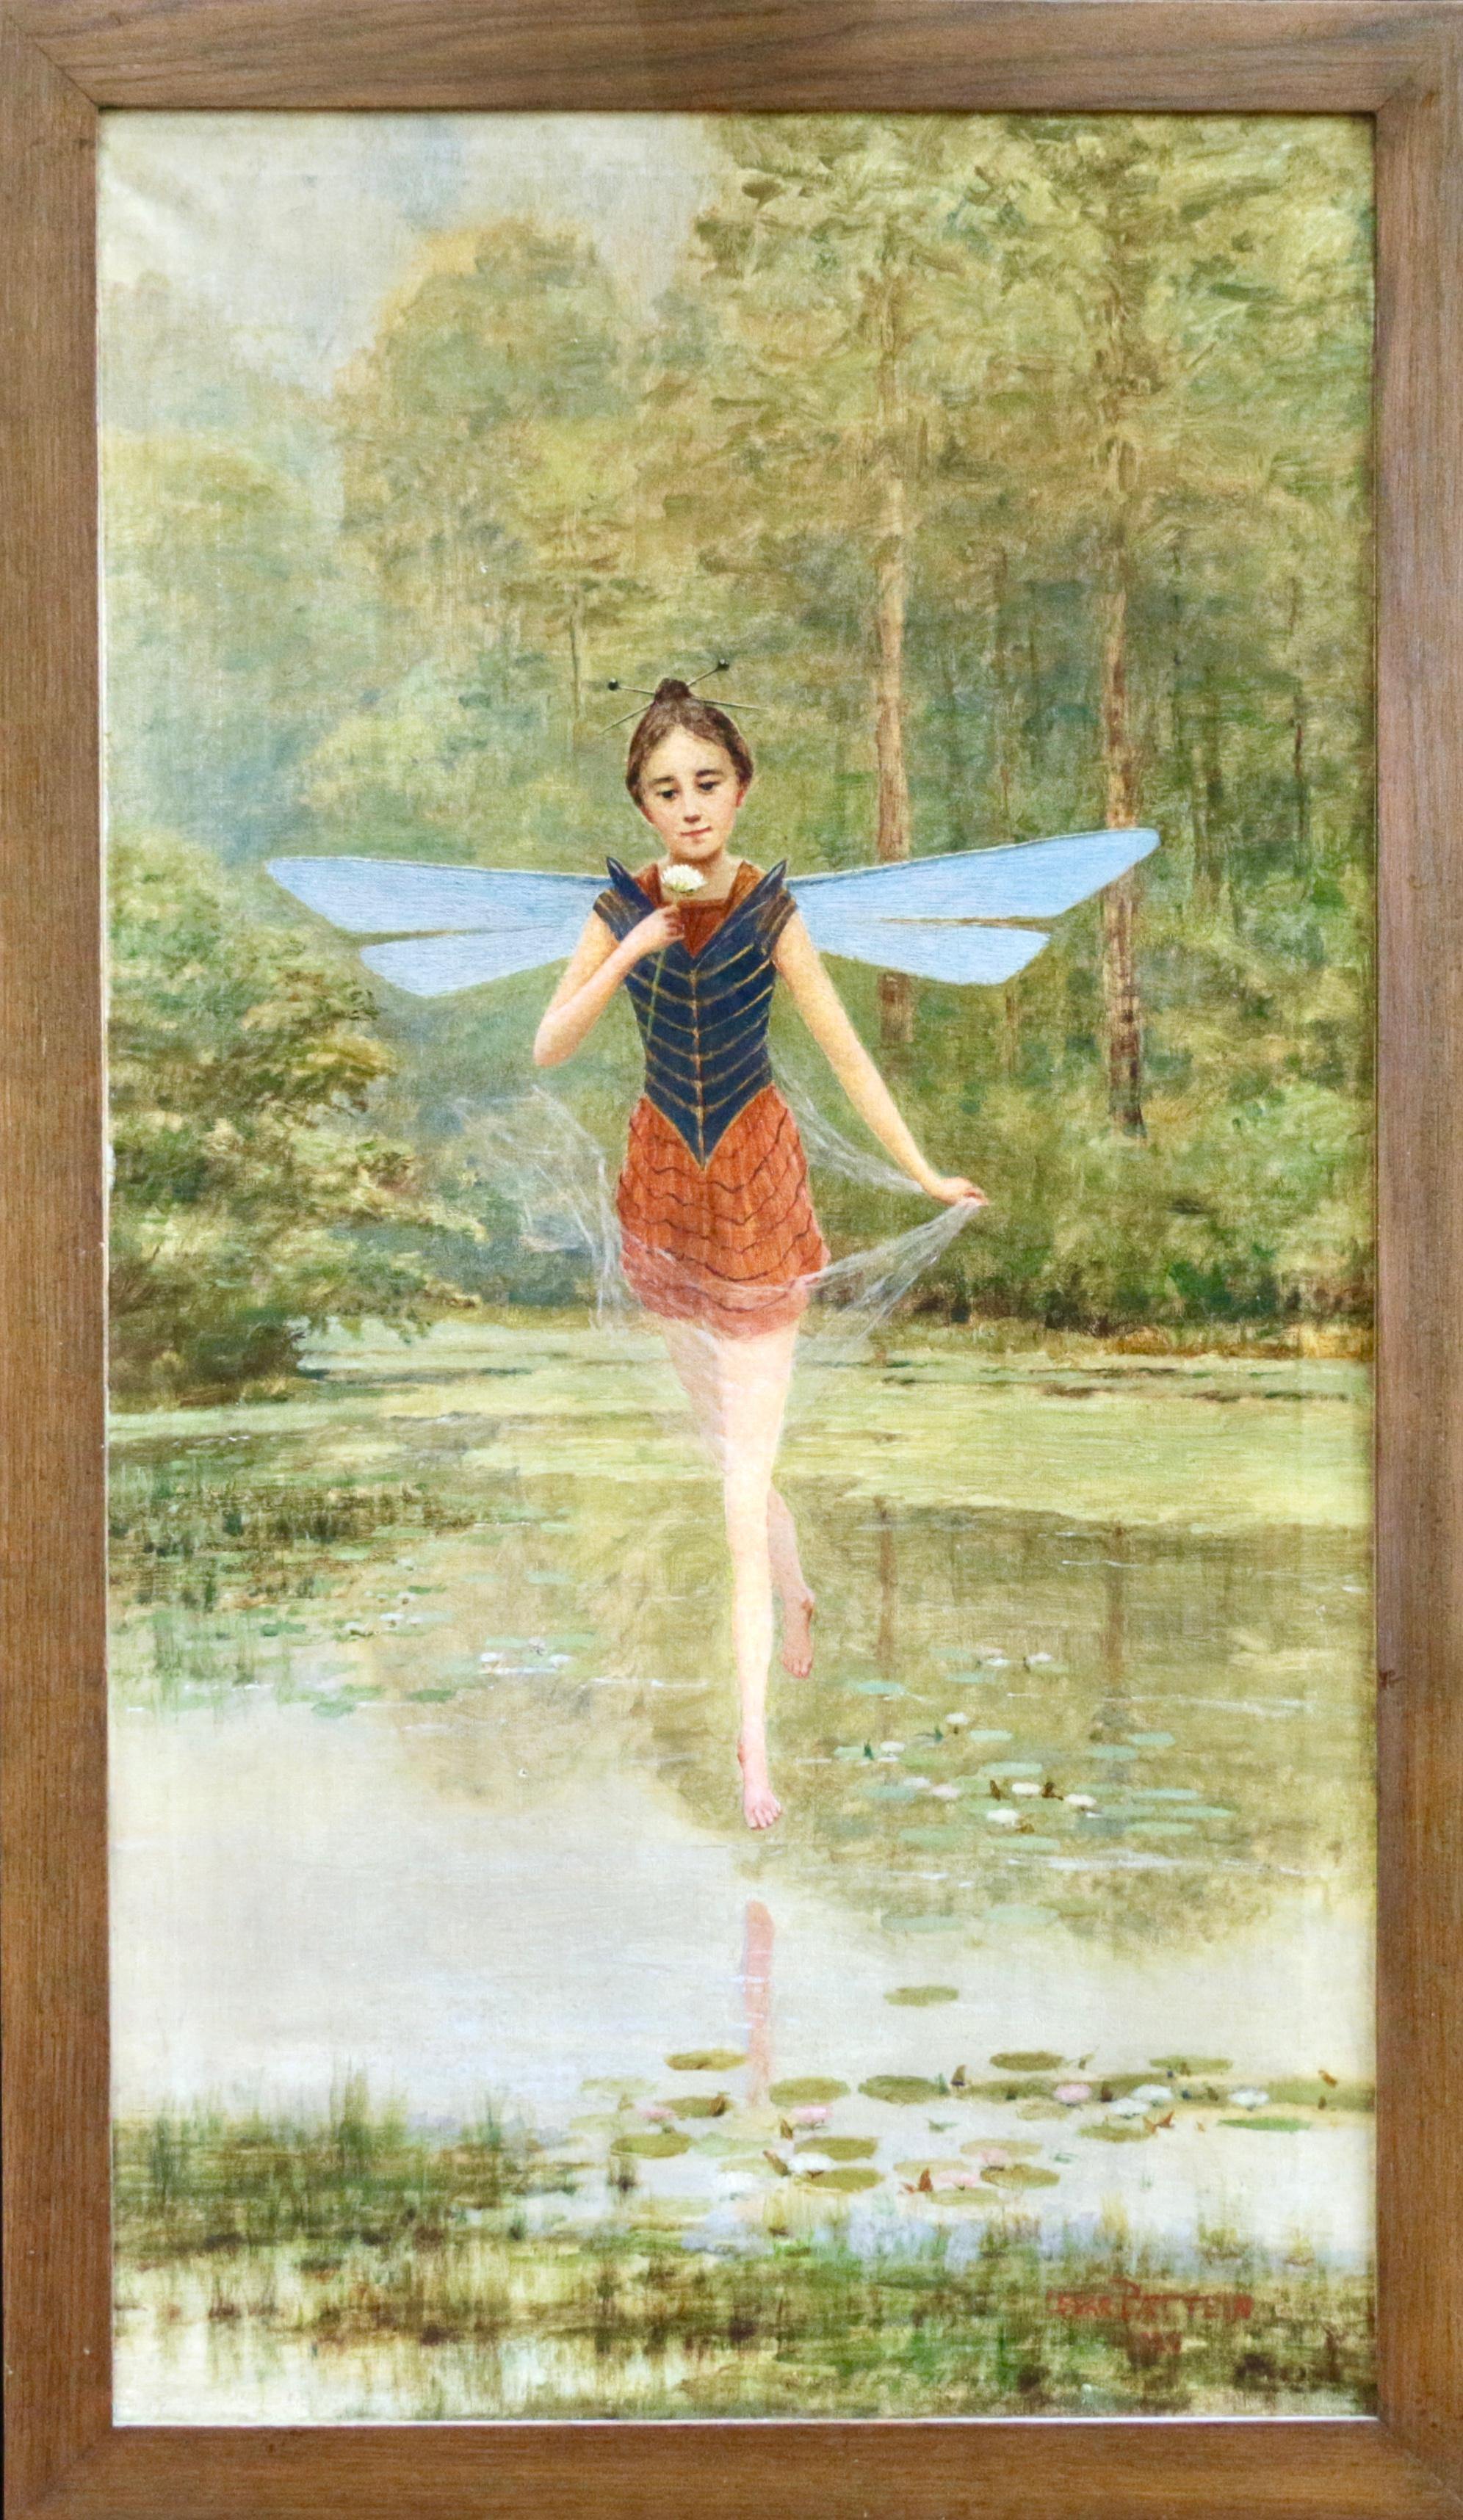 César Pattein Figurative Painting - A Fairy - Early 20th Century Oil, Figure in Riverscape Landscape - Cesar Pattein